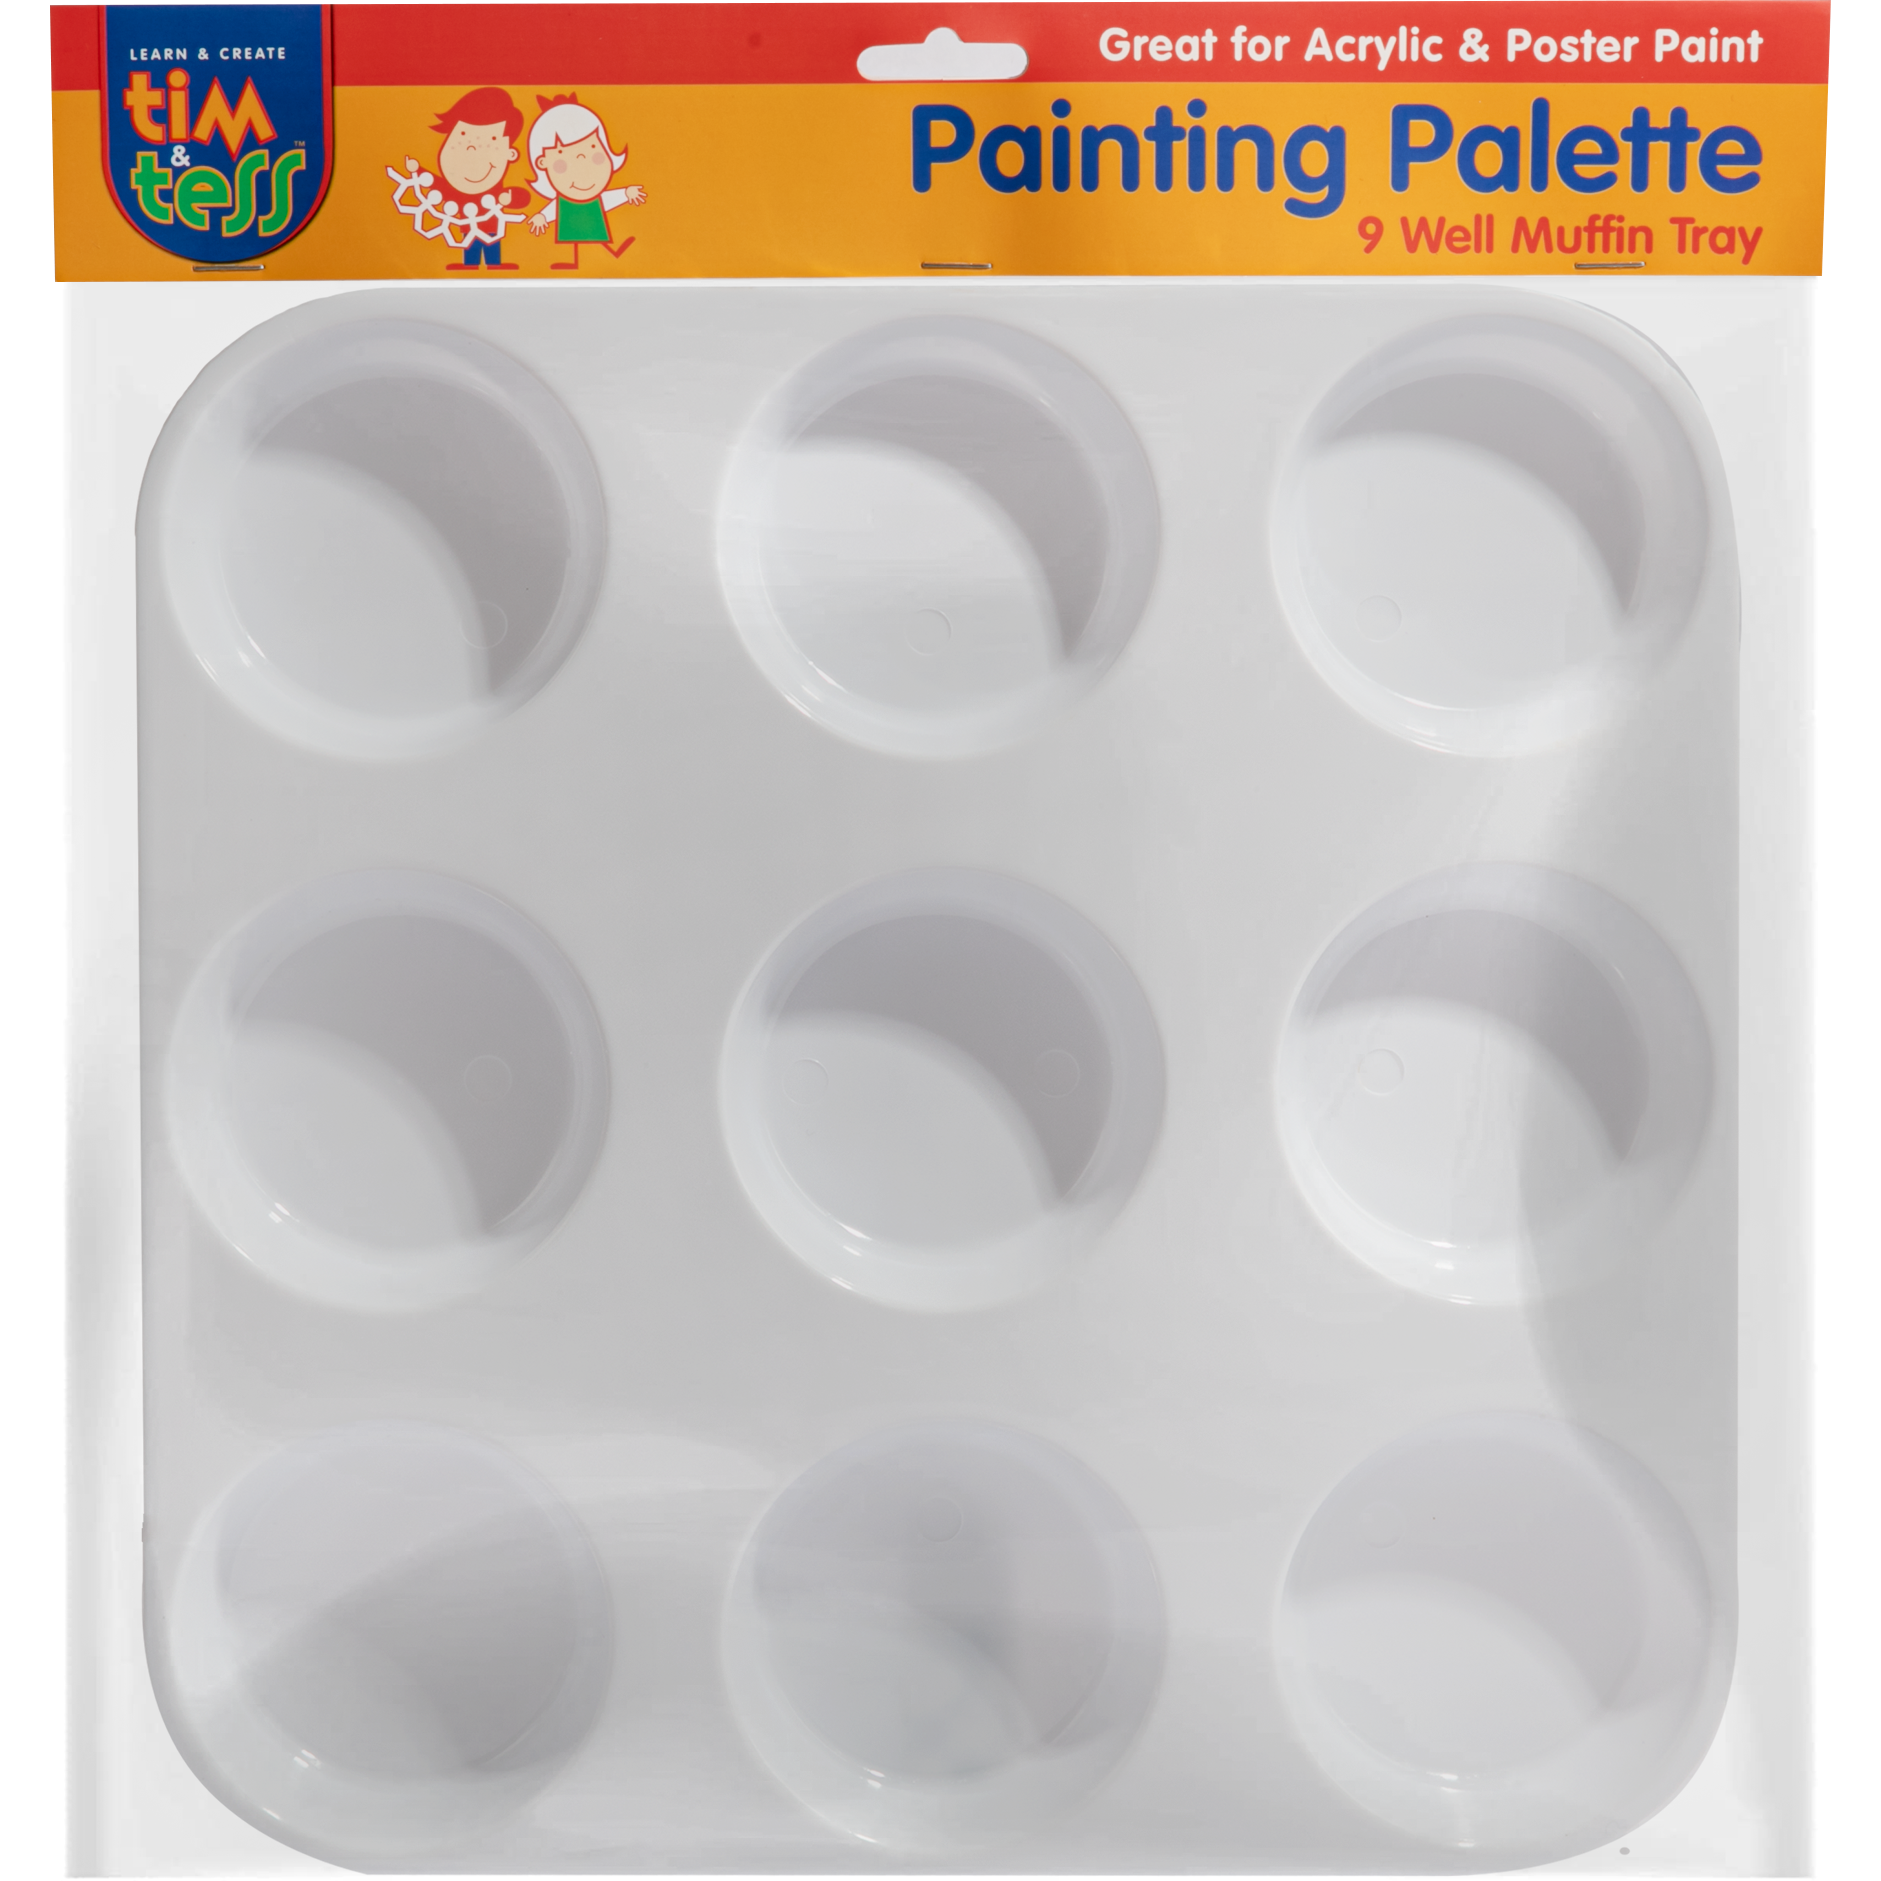 Image of Tim & Tess Plastic 9 Well Muffin Tray Palette